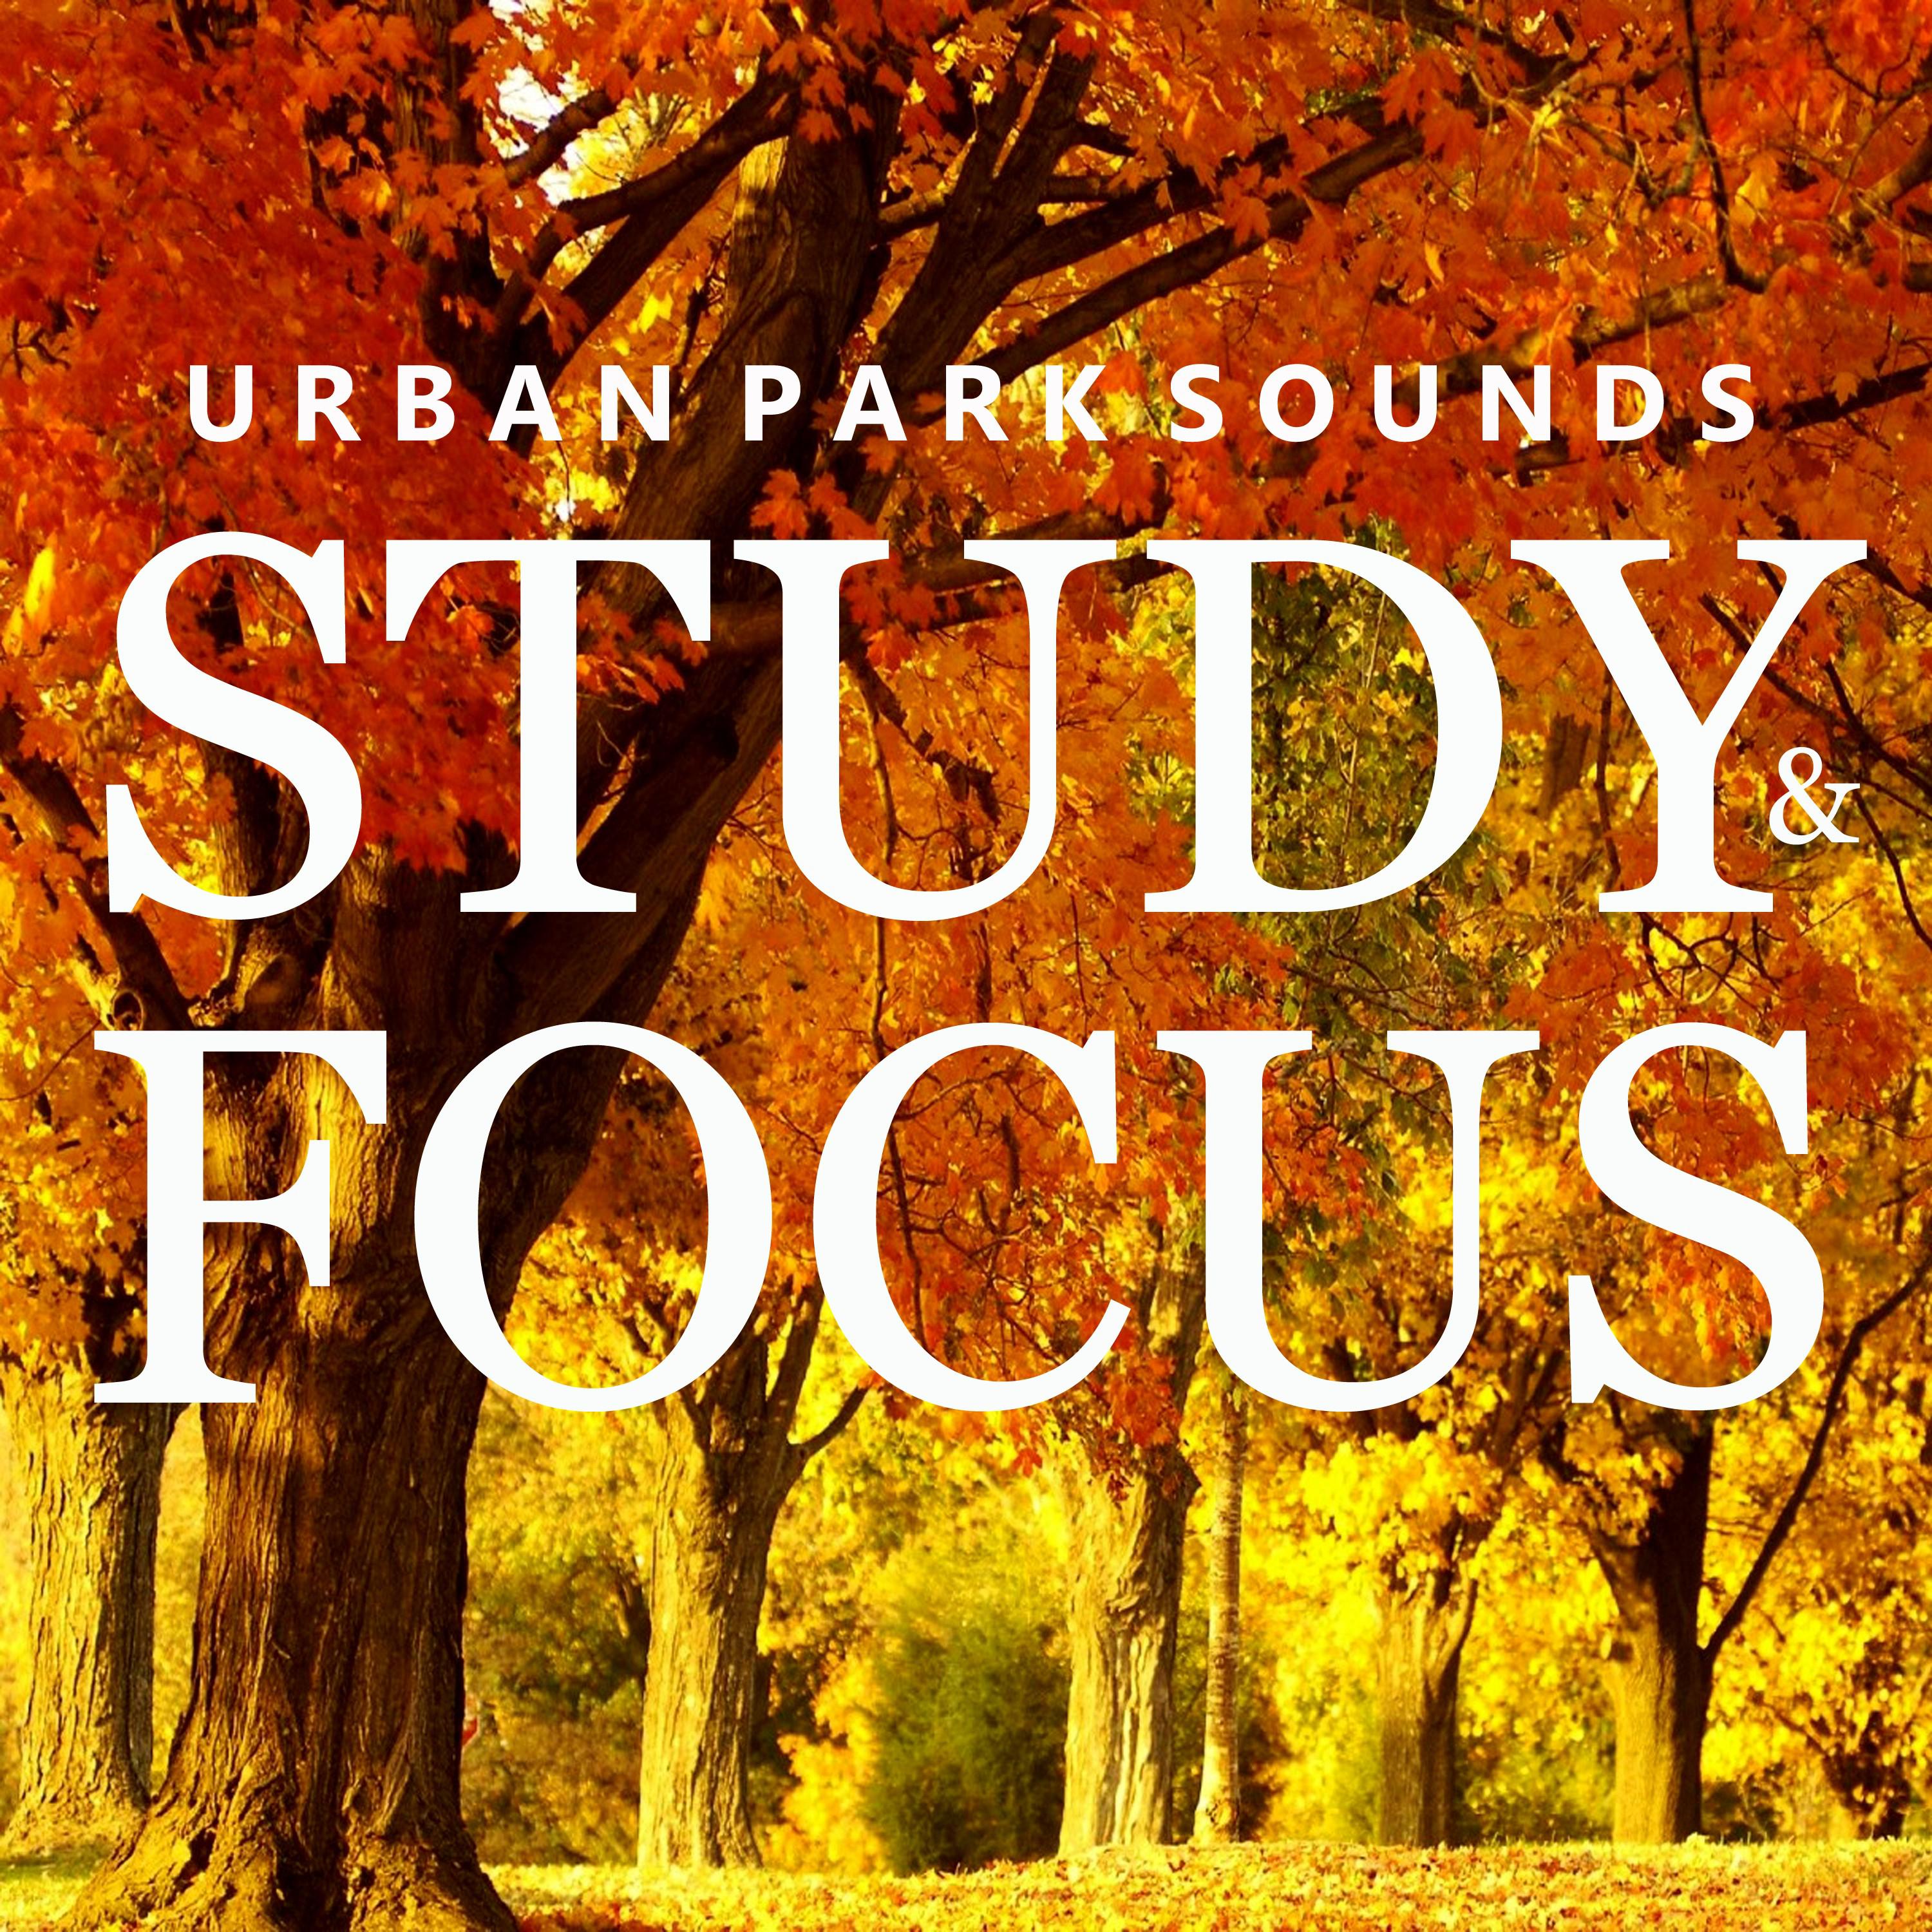 Urban Park Sounds for Studying, Pt. 32